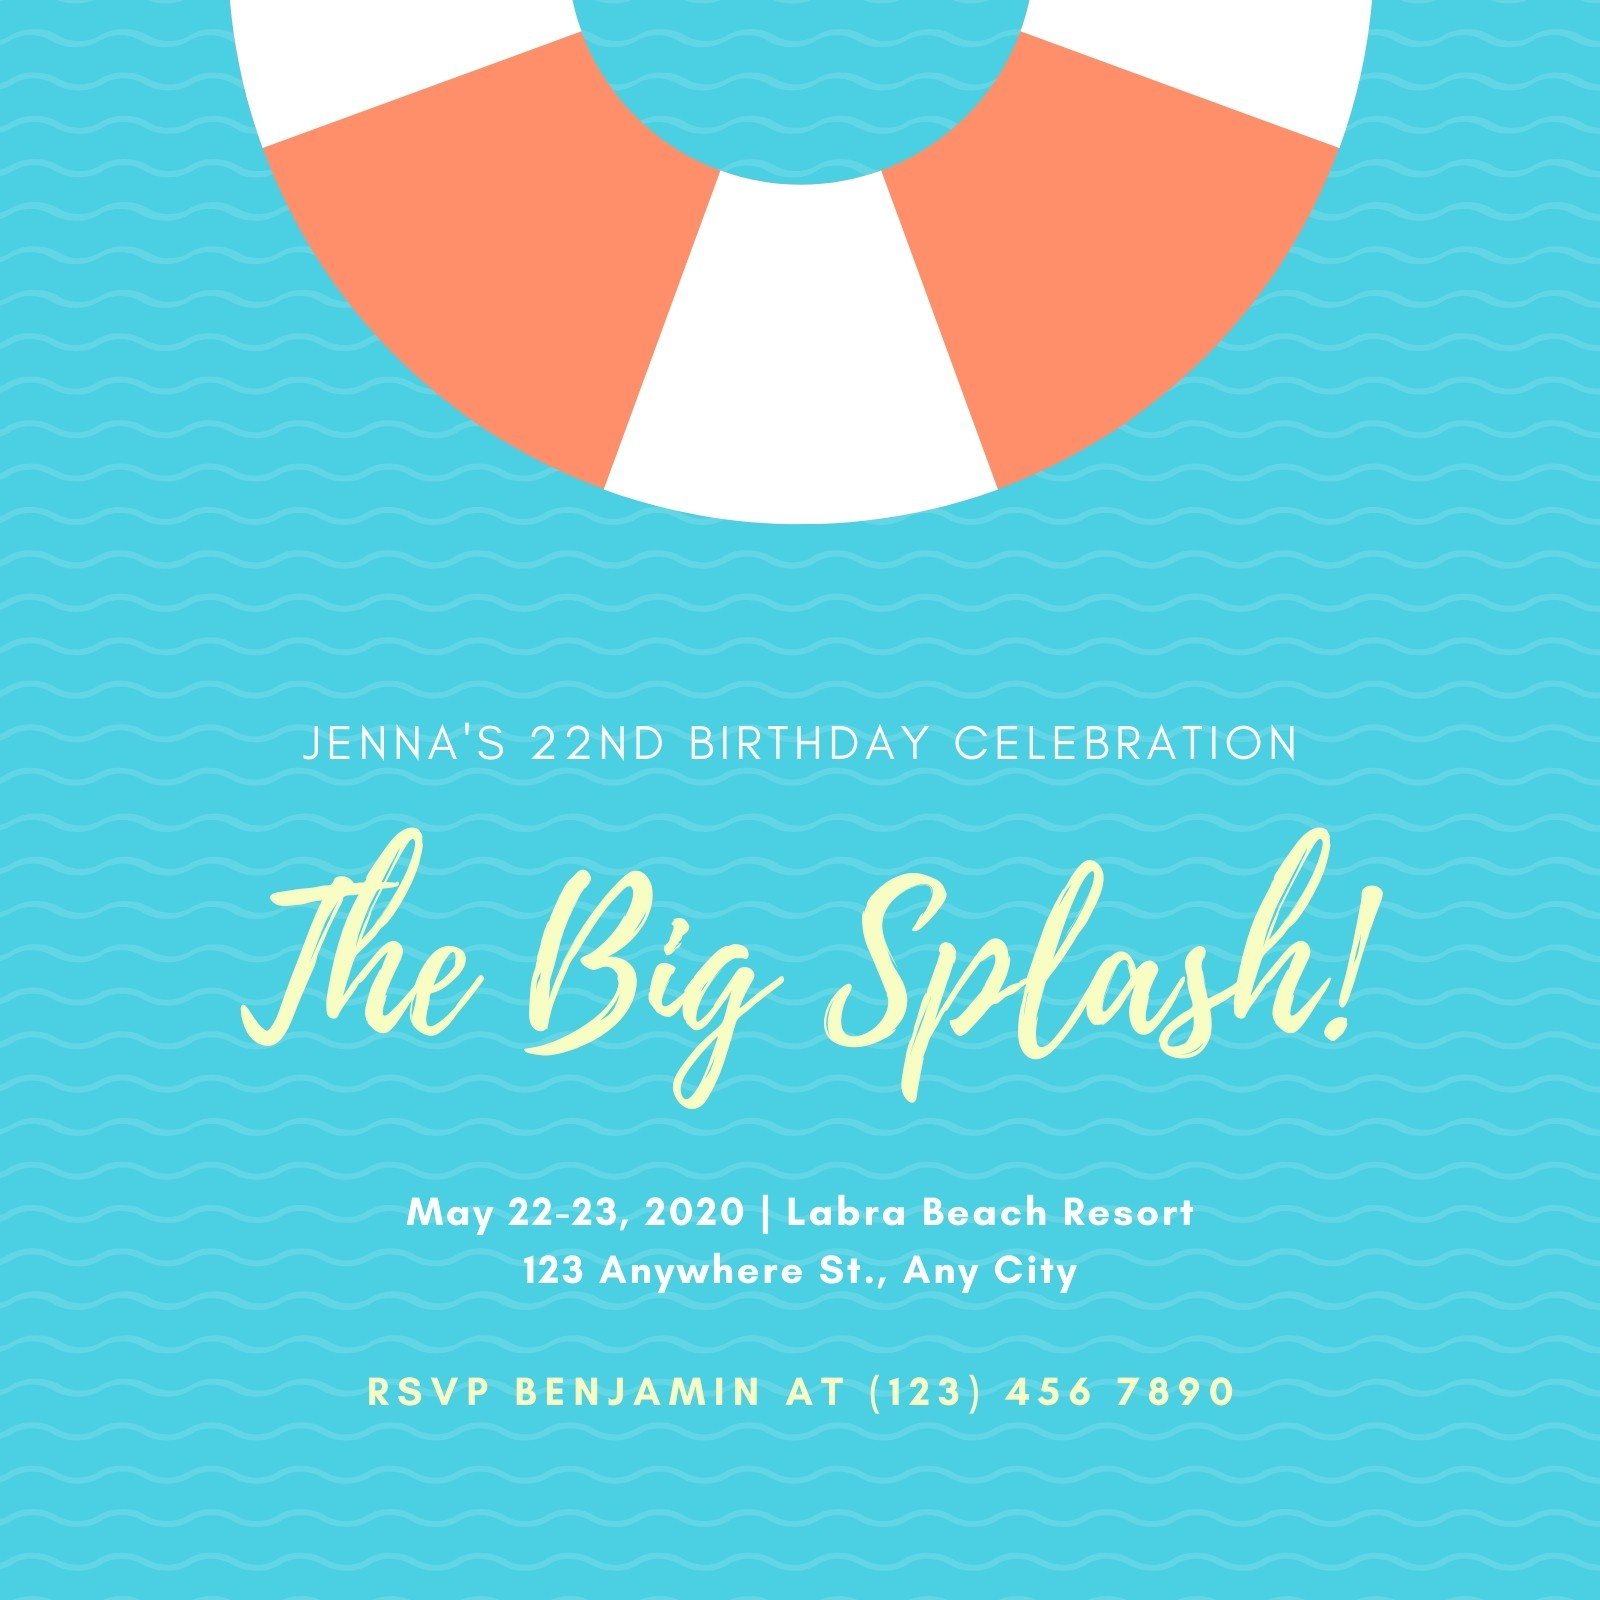 paper-party-supplies-invitations-announcements-birthday-invitation